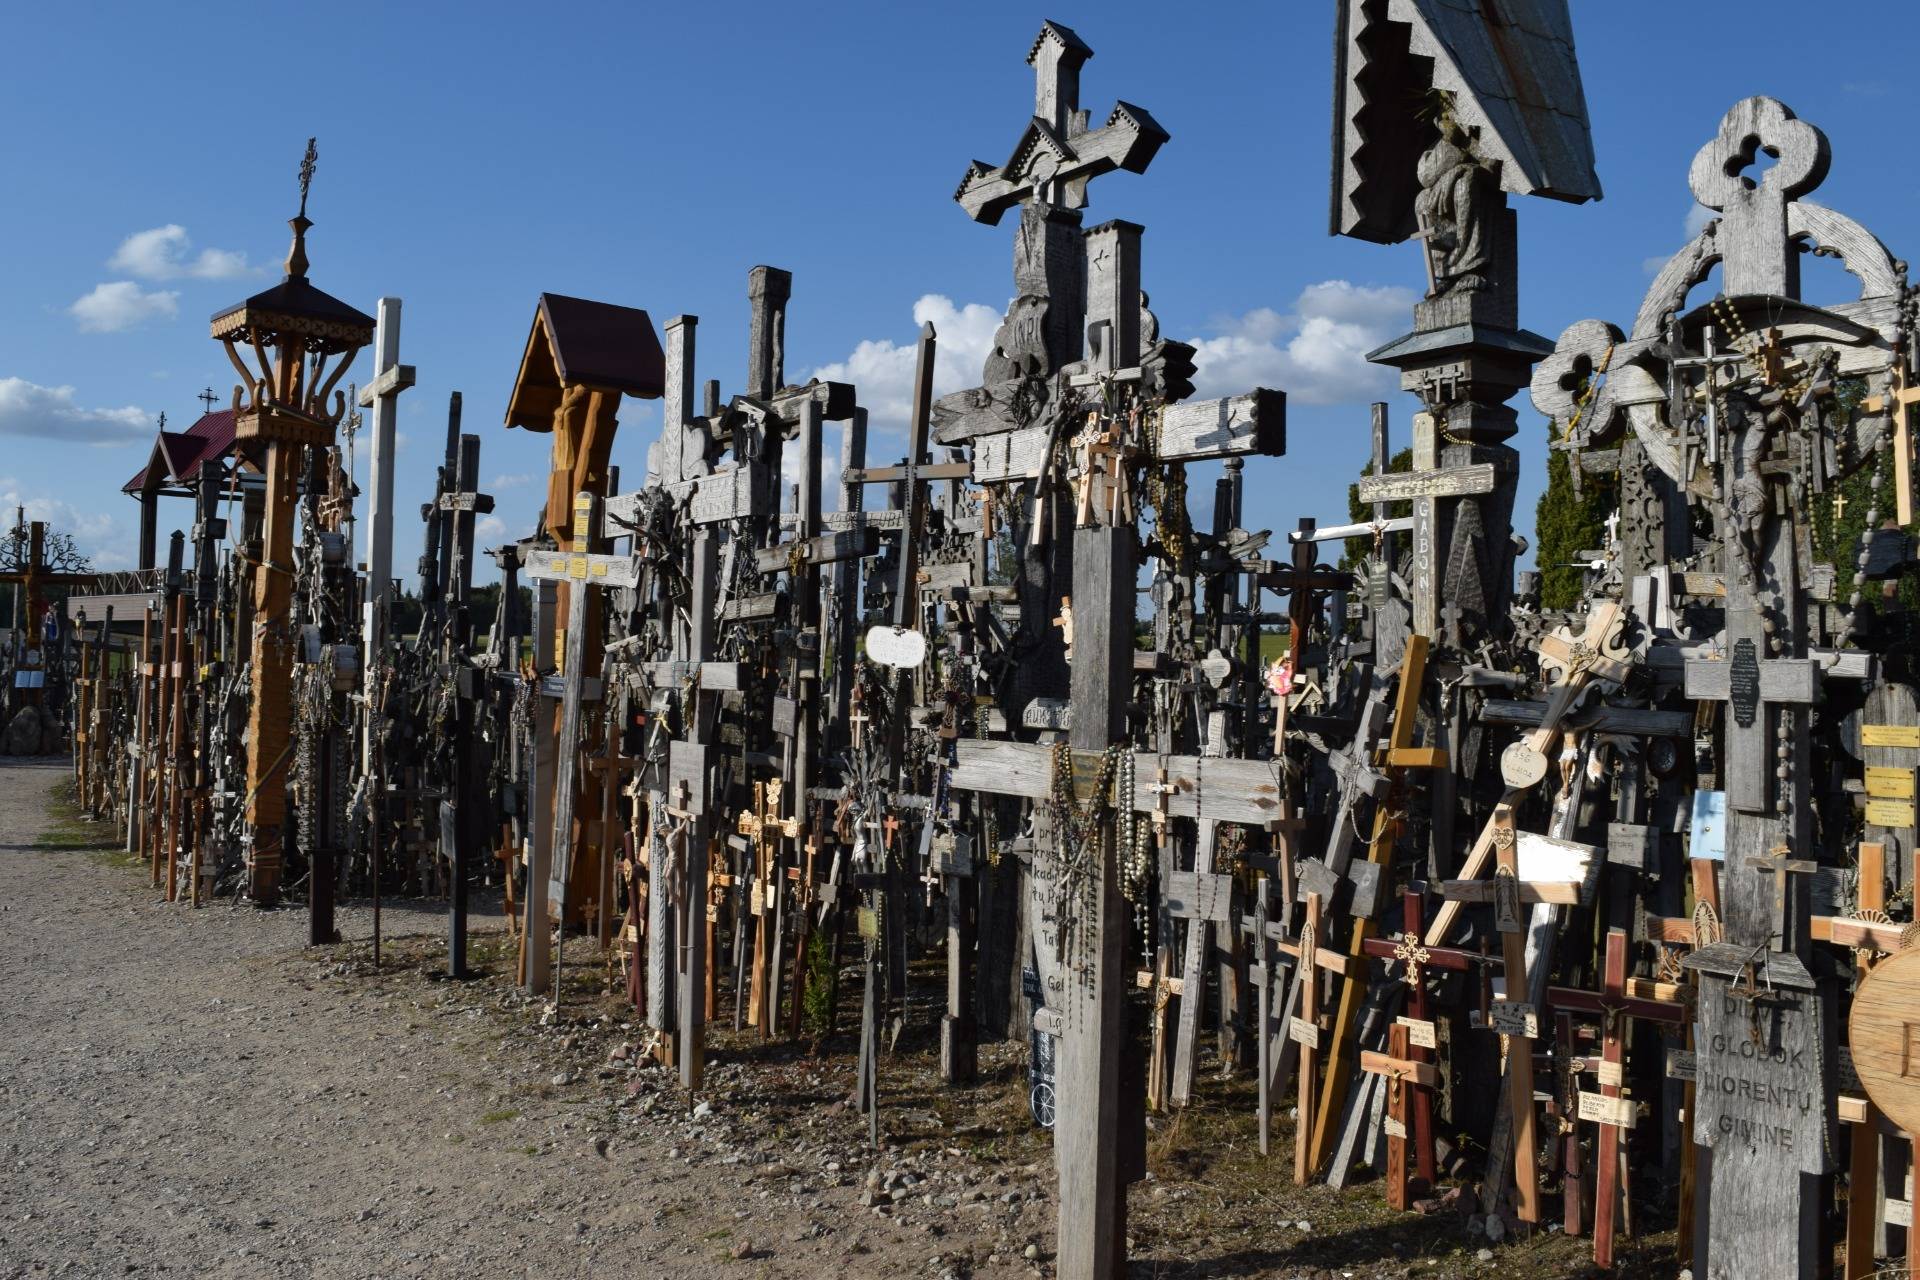 A closer look at some of the crosses